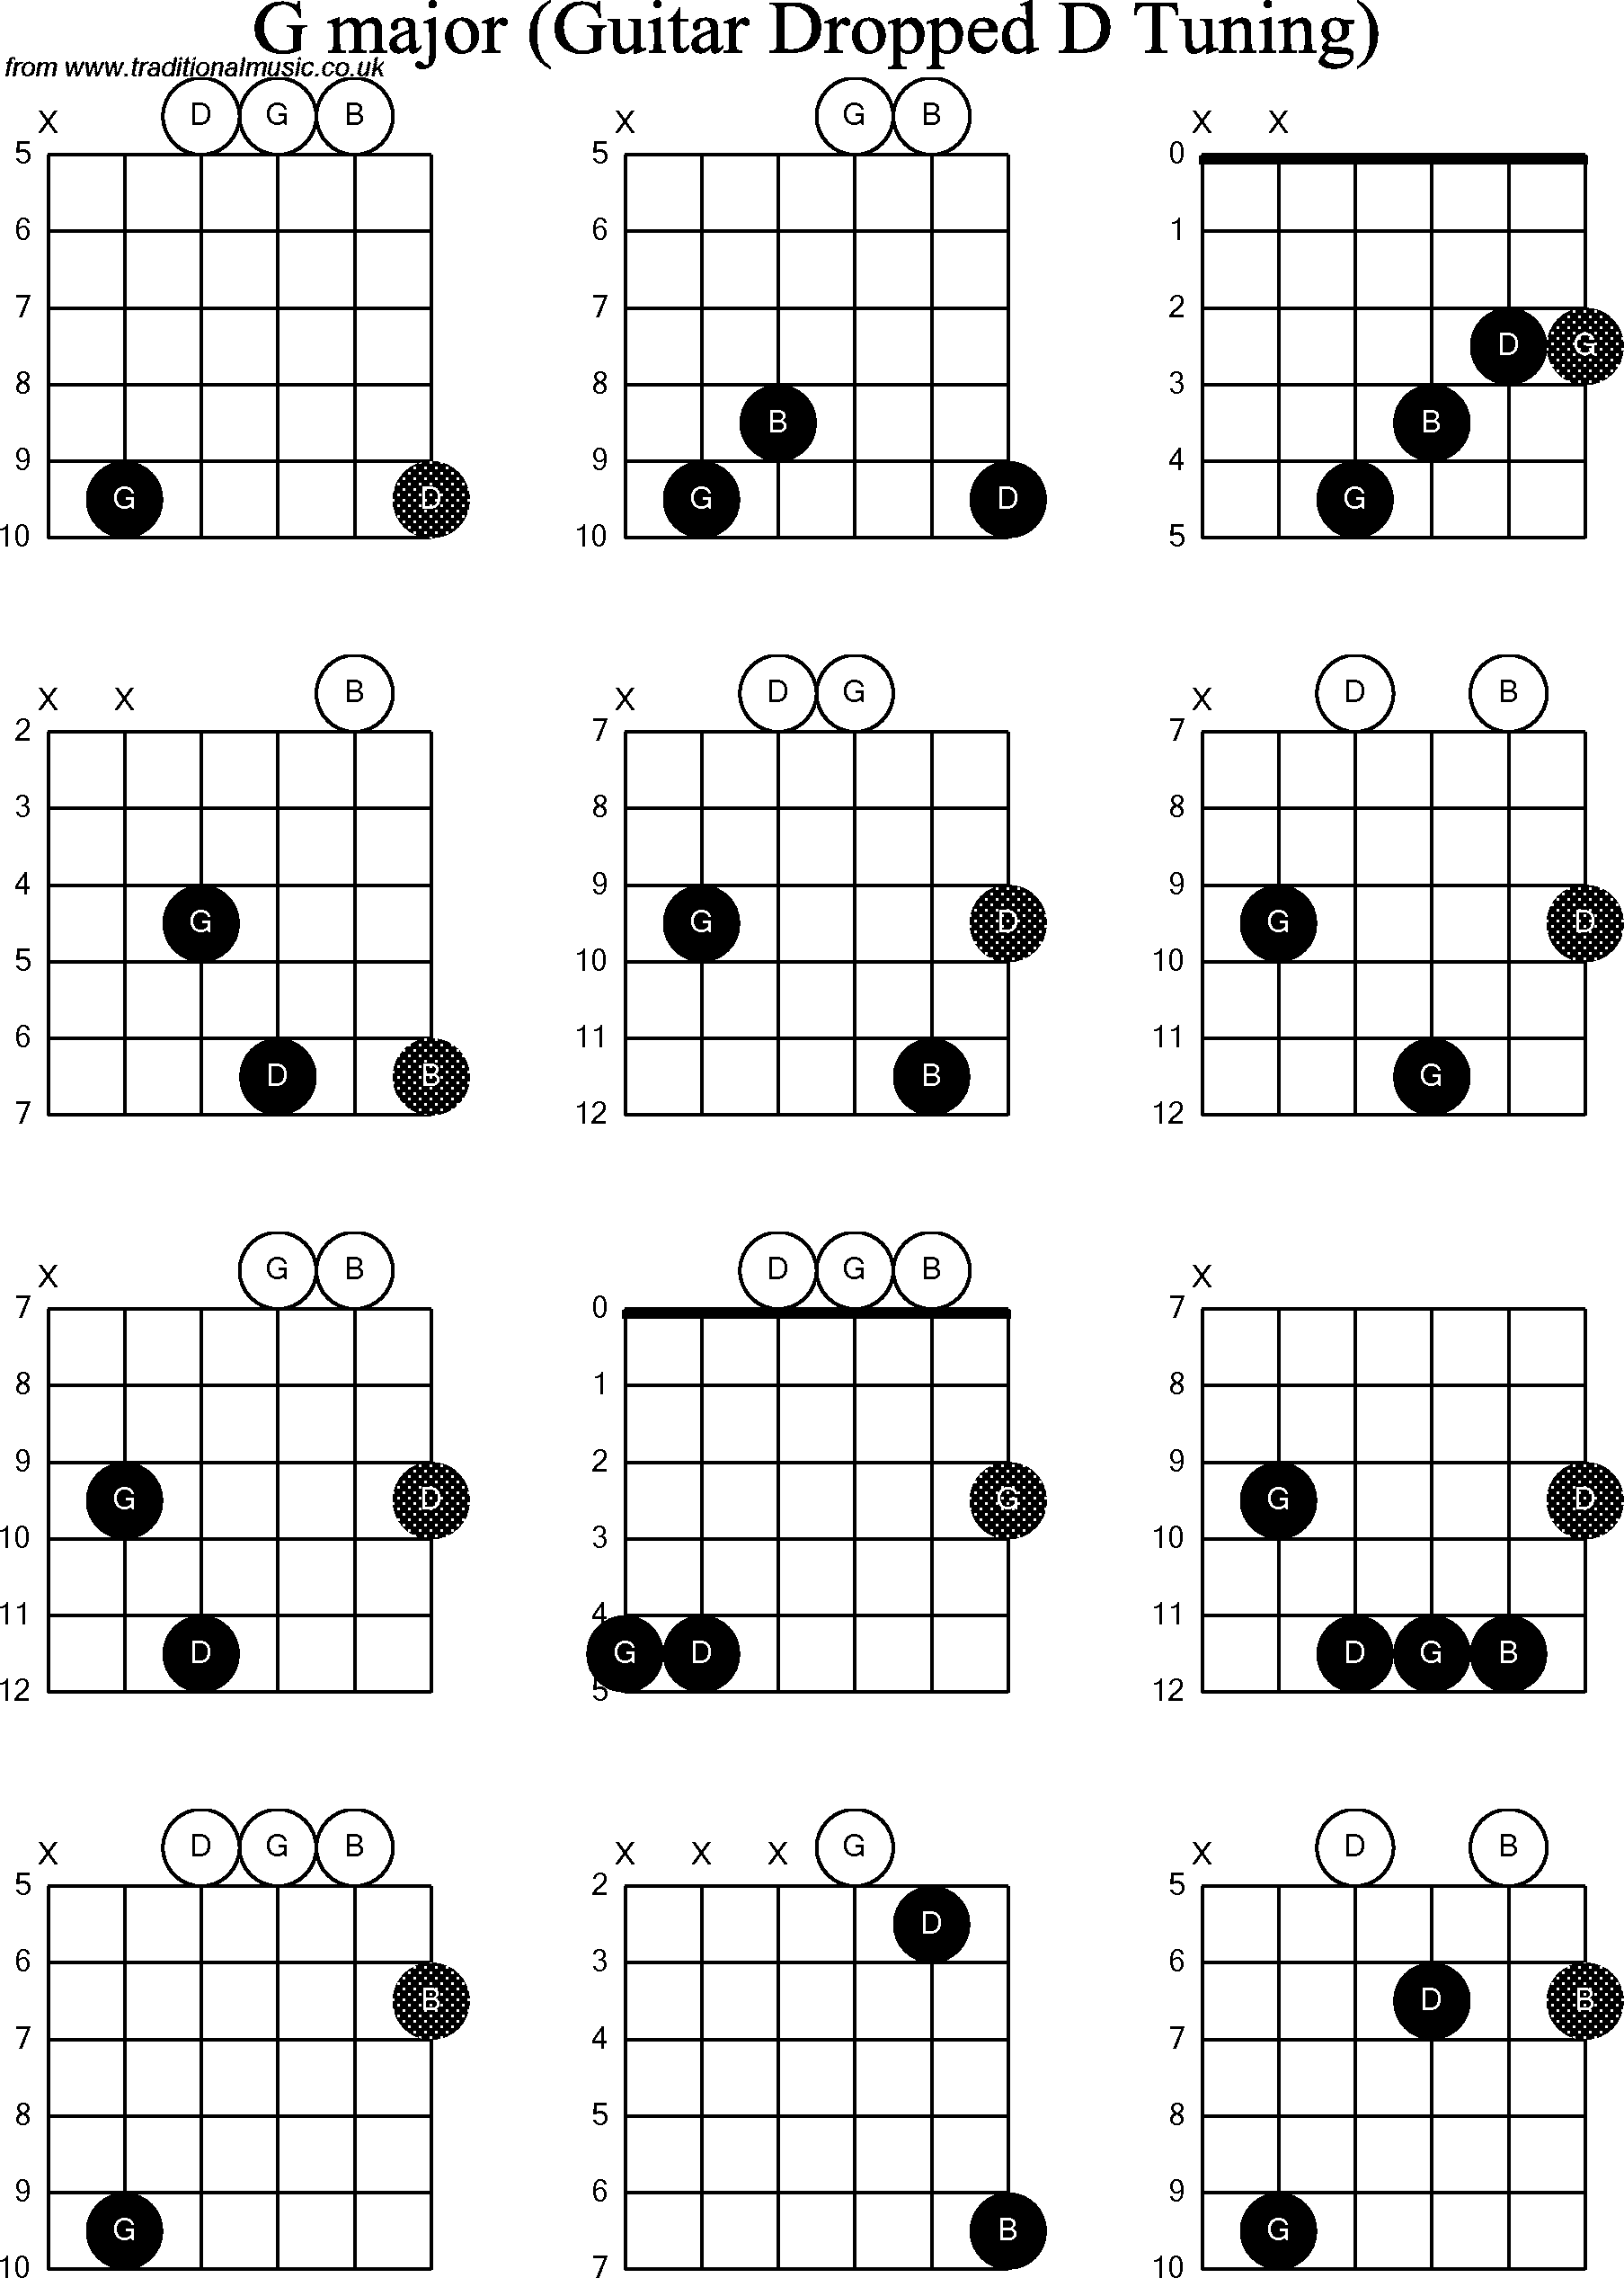 Chord diagrams for dropped D Guitar(DADGBE), G